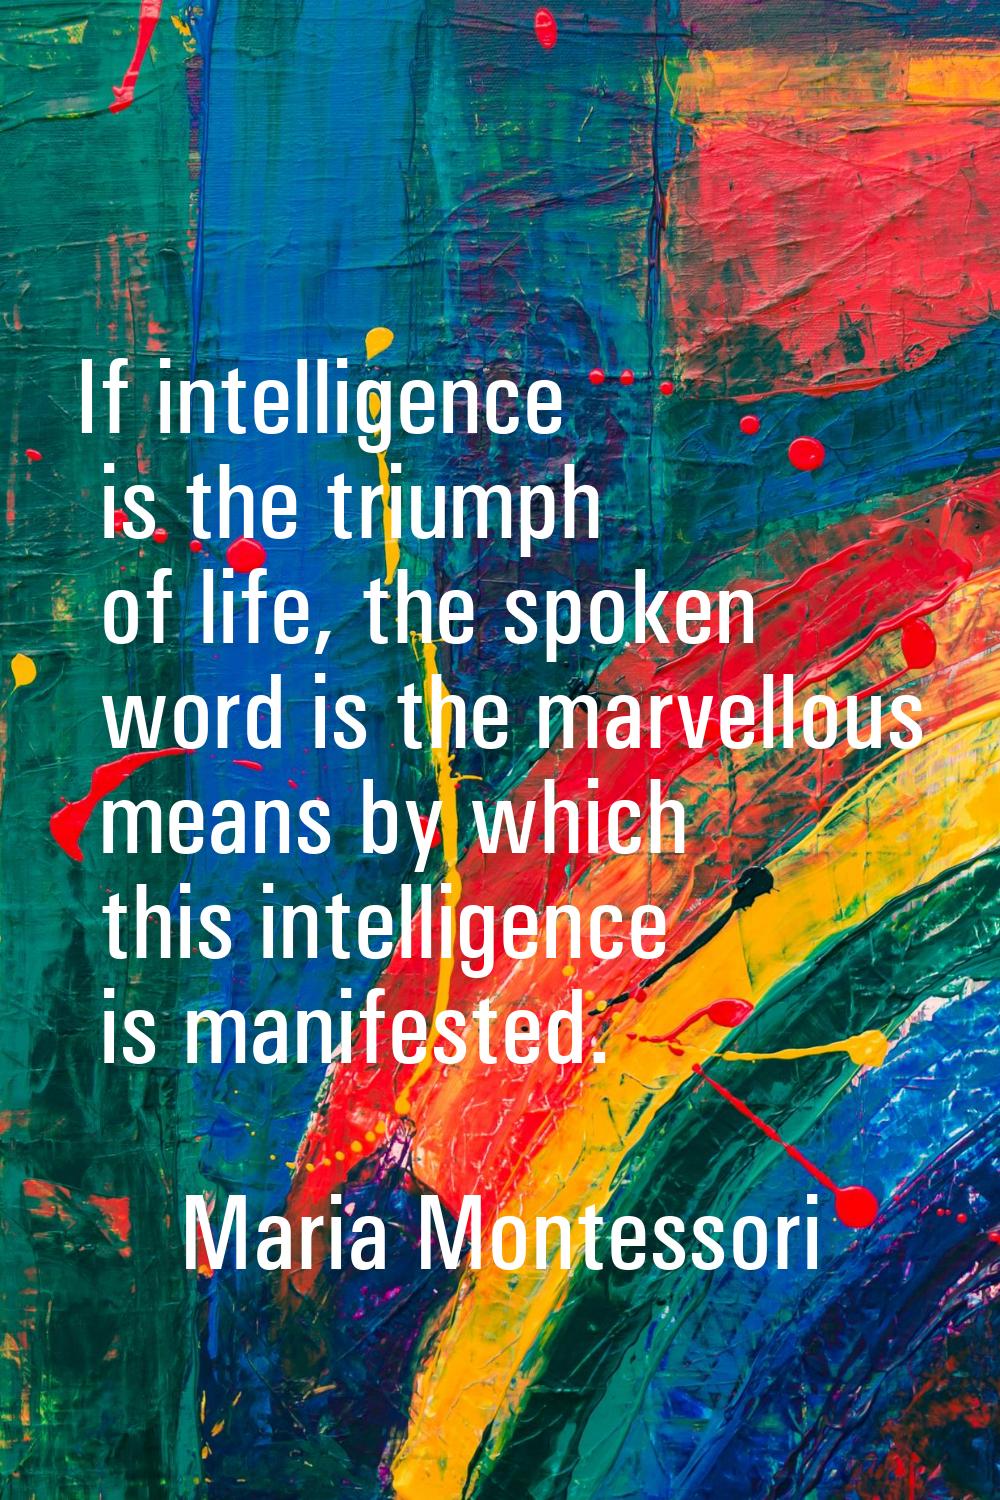 If intelligence is the triumph of life, the spoken word is the marvellous means by which this intel